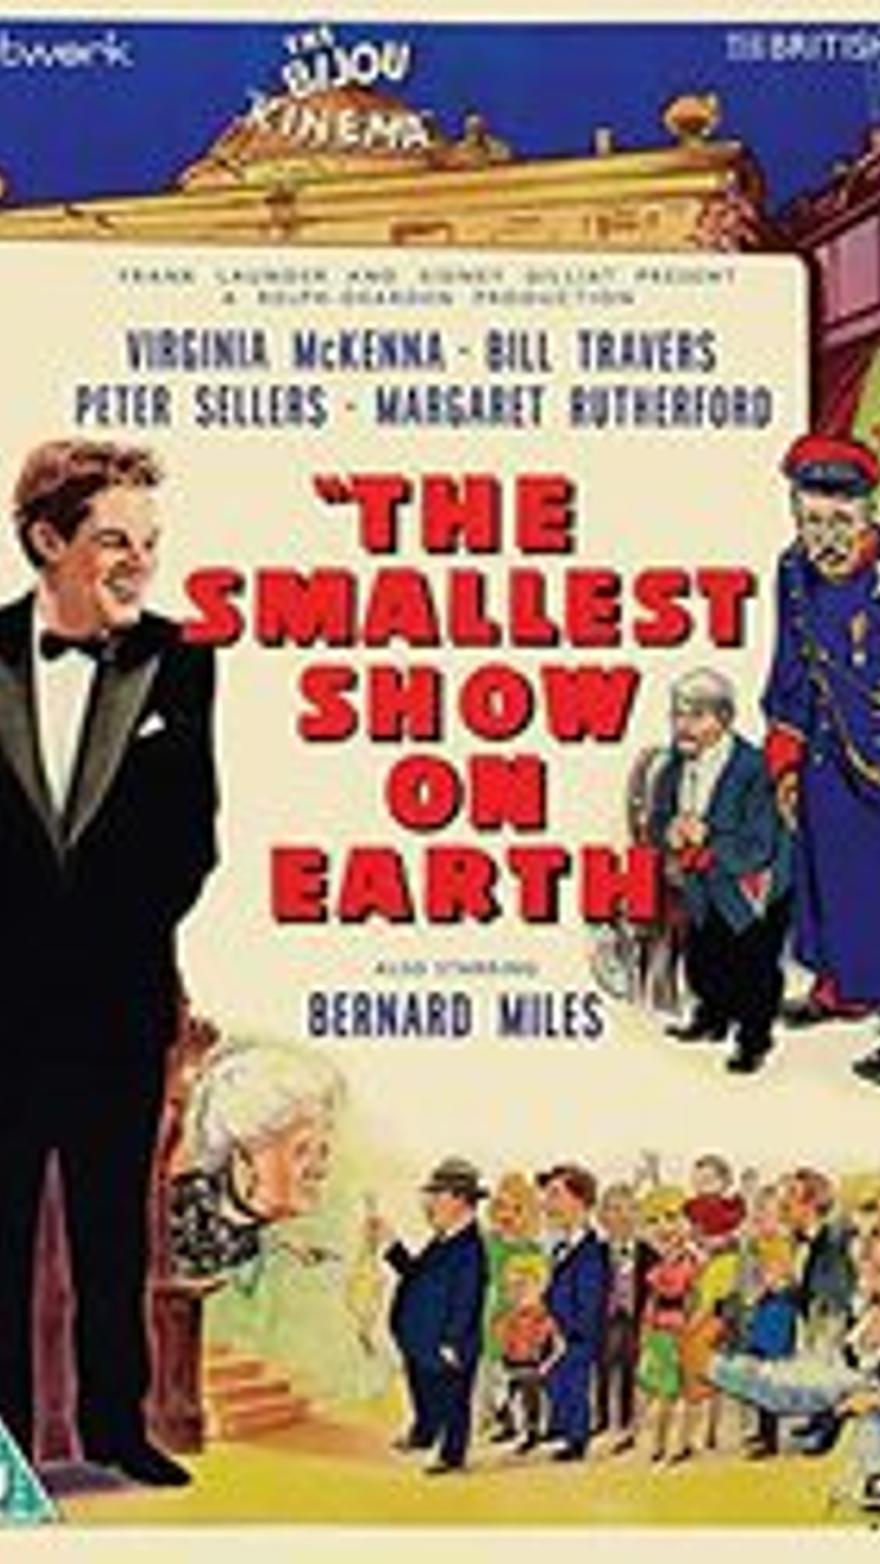 The Smallest Show on Earth